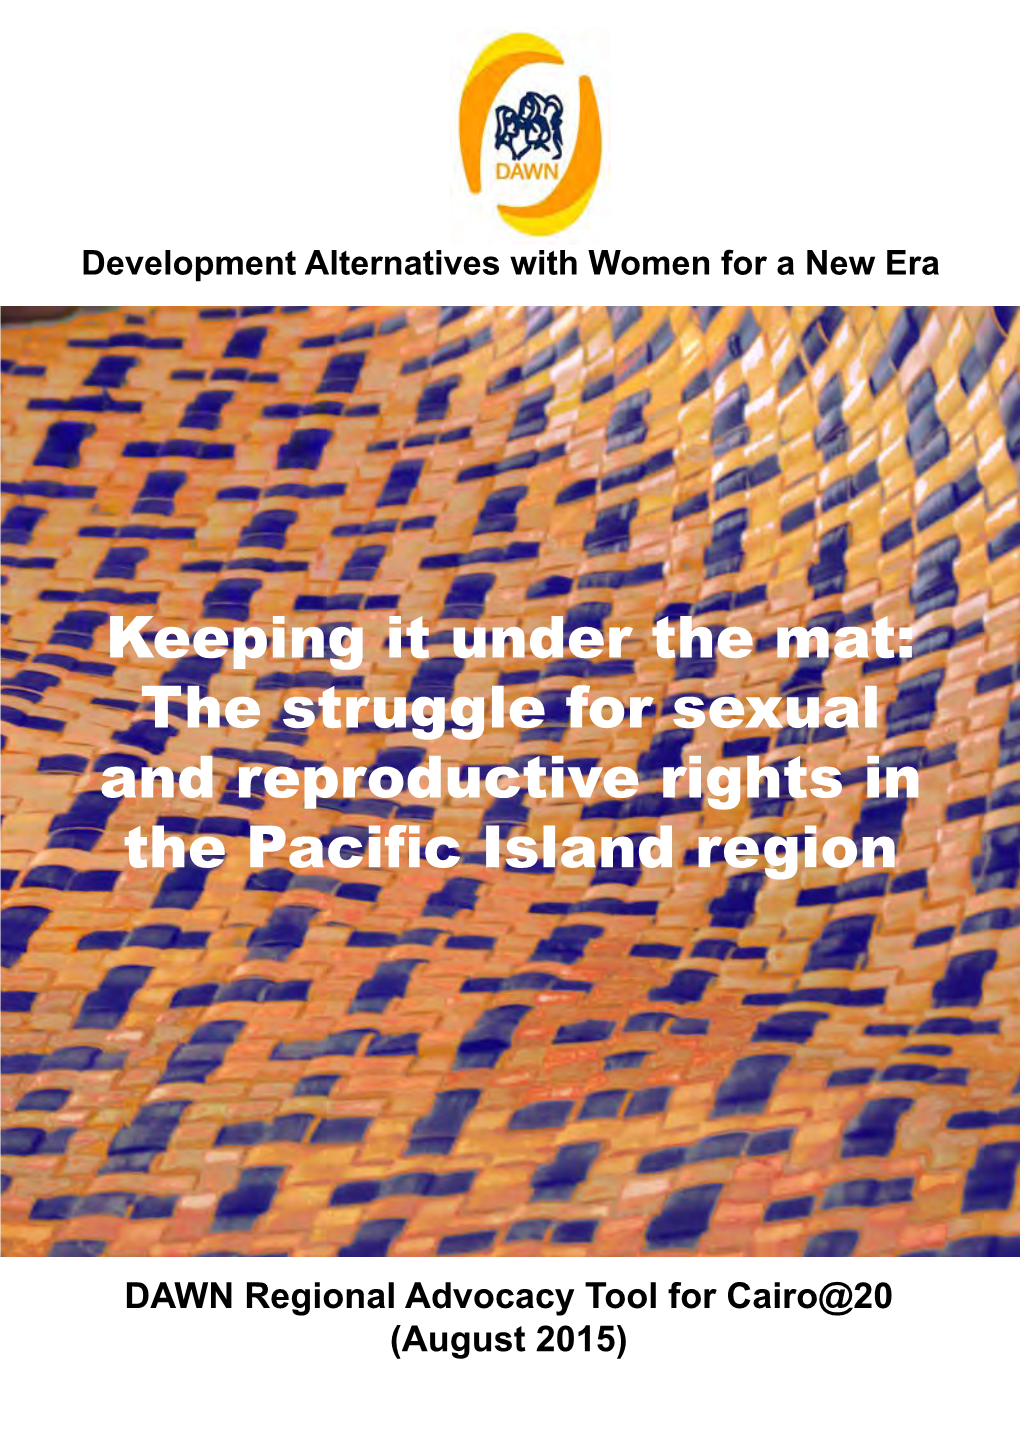 The Struggle for Sexual and Reproductive Rights in the Pacific Island Region